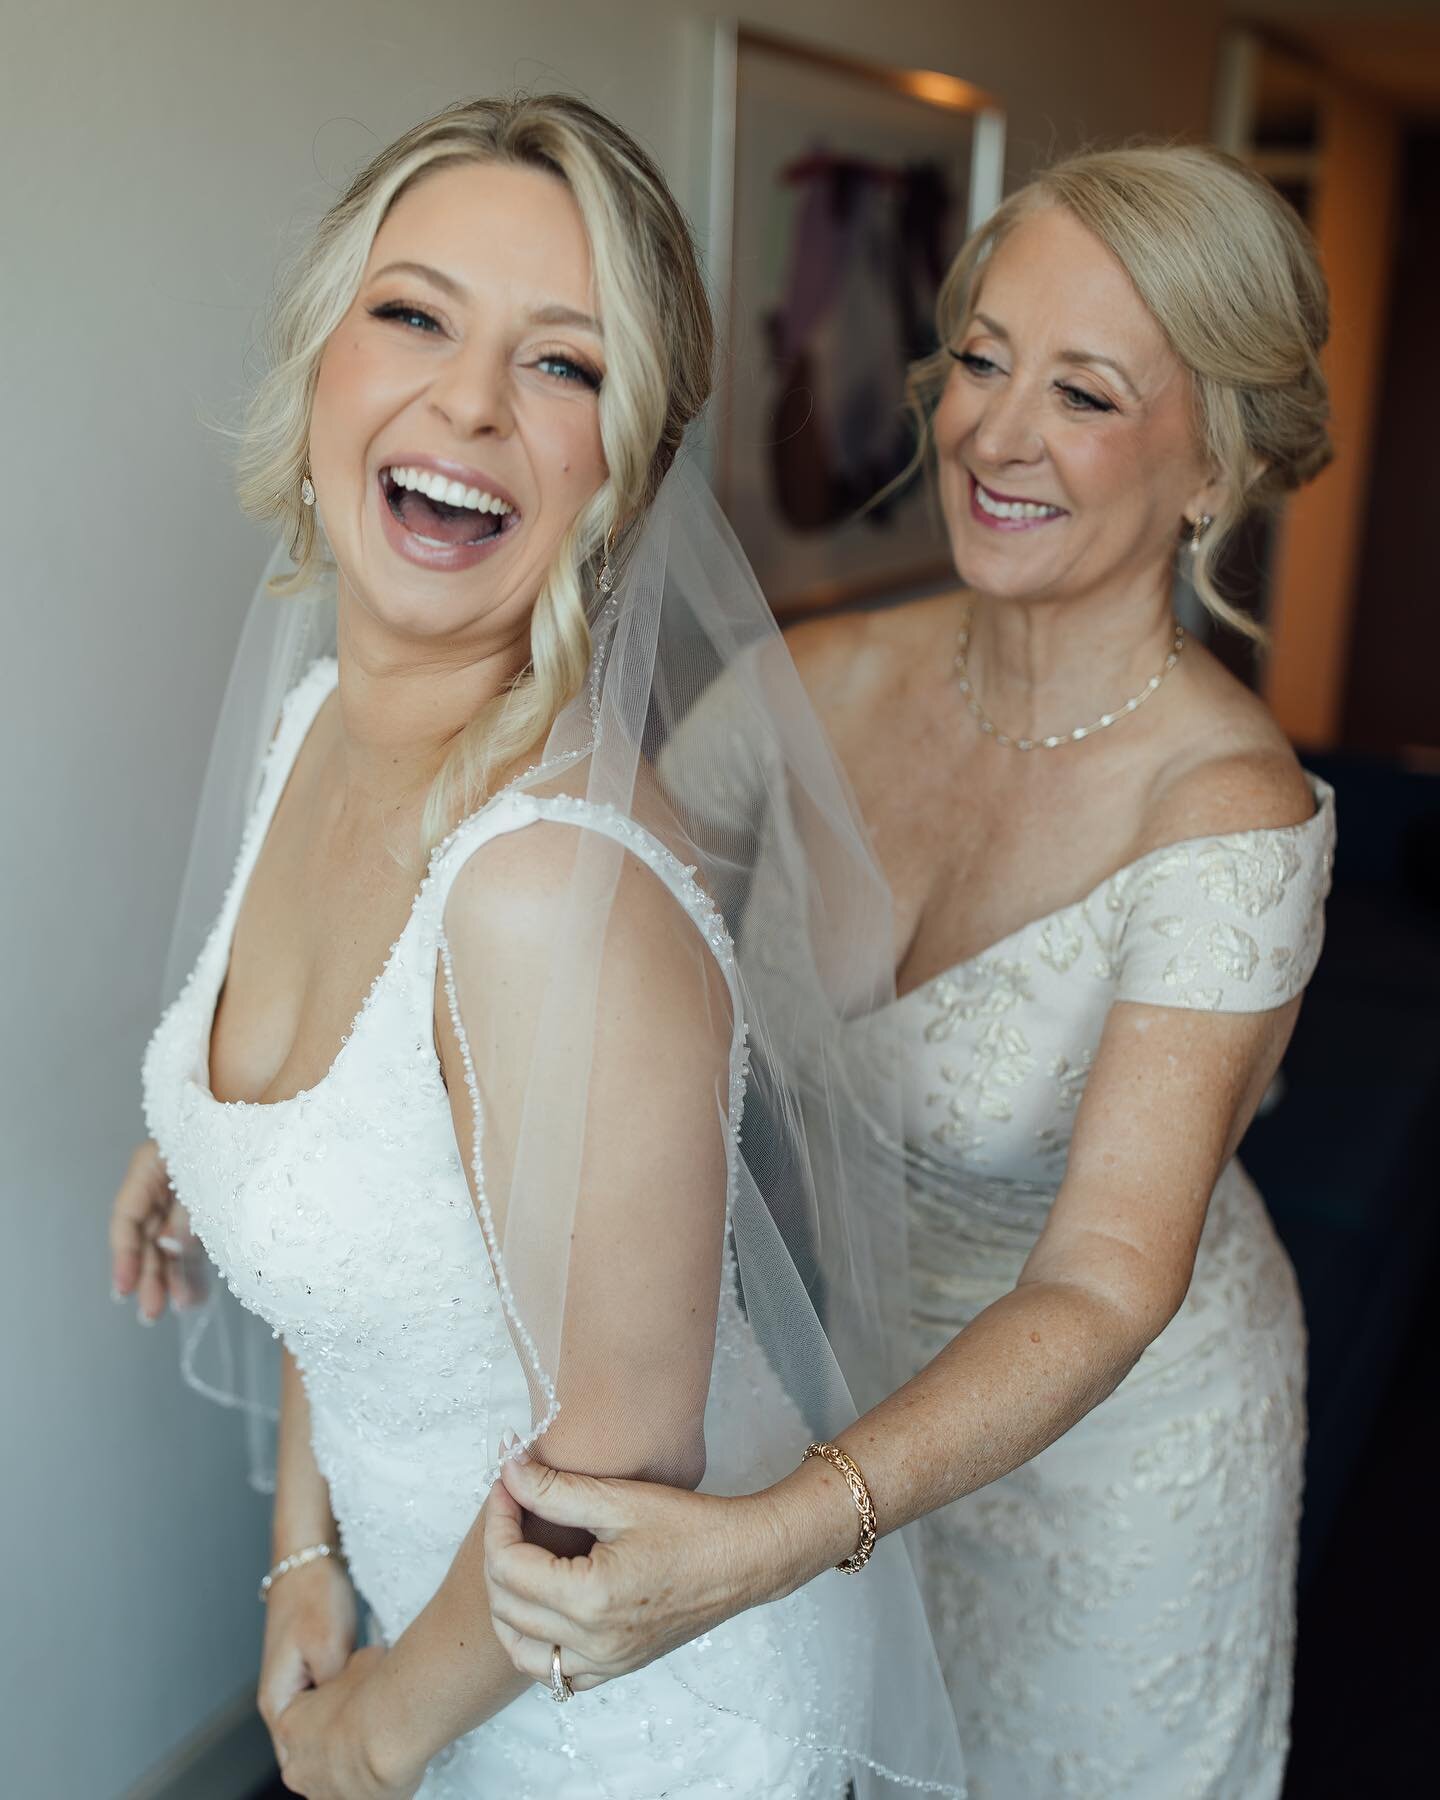 A happy bride is a beautiful bride 😍

Also can we appreciate how GORGEOUS her mama is too!!!?!!?

As much as I am loving this break from weddings I am also ITCHING to get back into it and celebrating my couples!!! 

#couples #engagement #love #photo